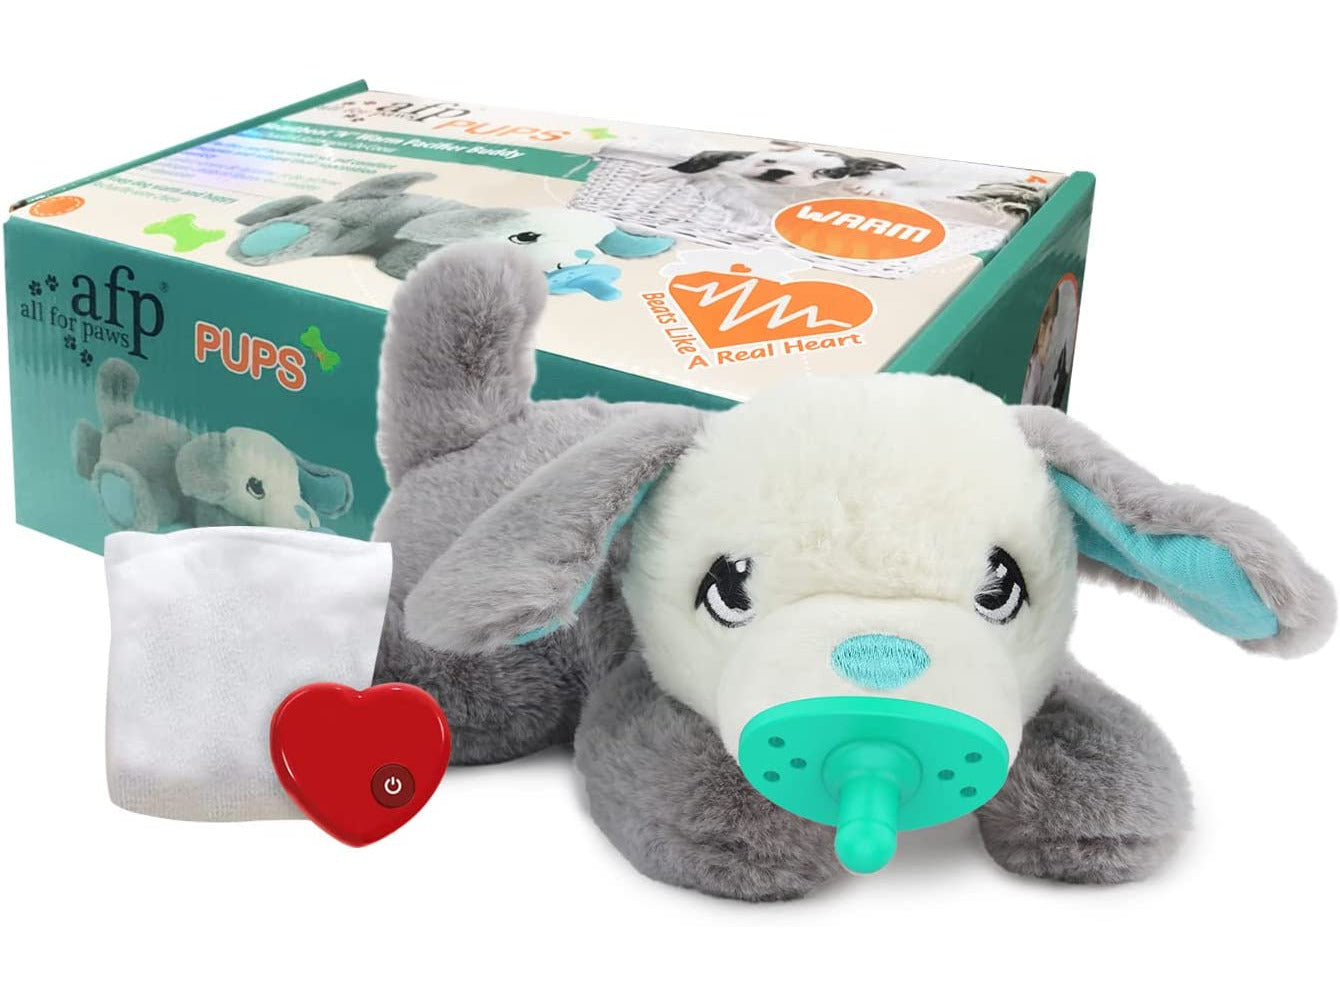 Afb Pups - Heartbeat"N" Warm Pacifier Buddy - White